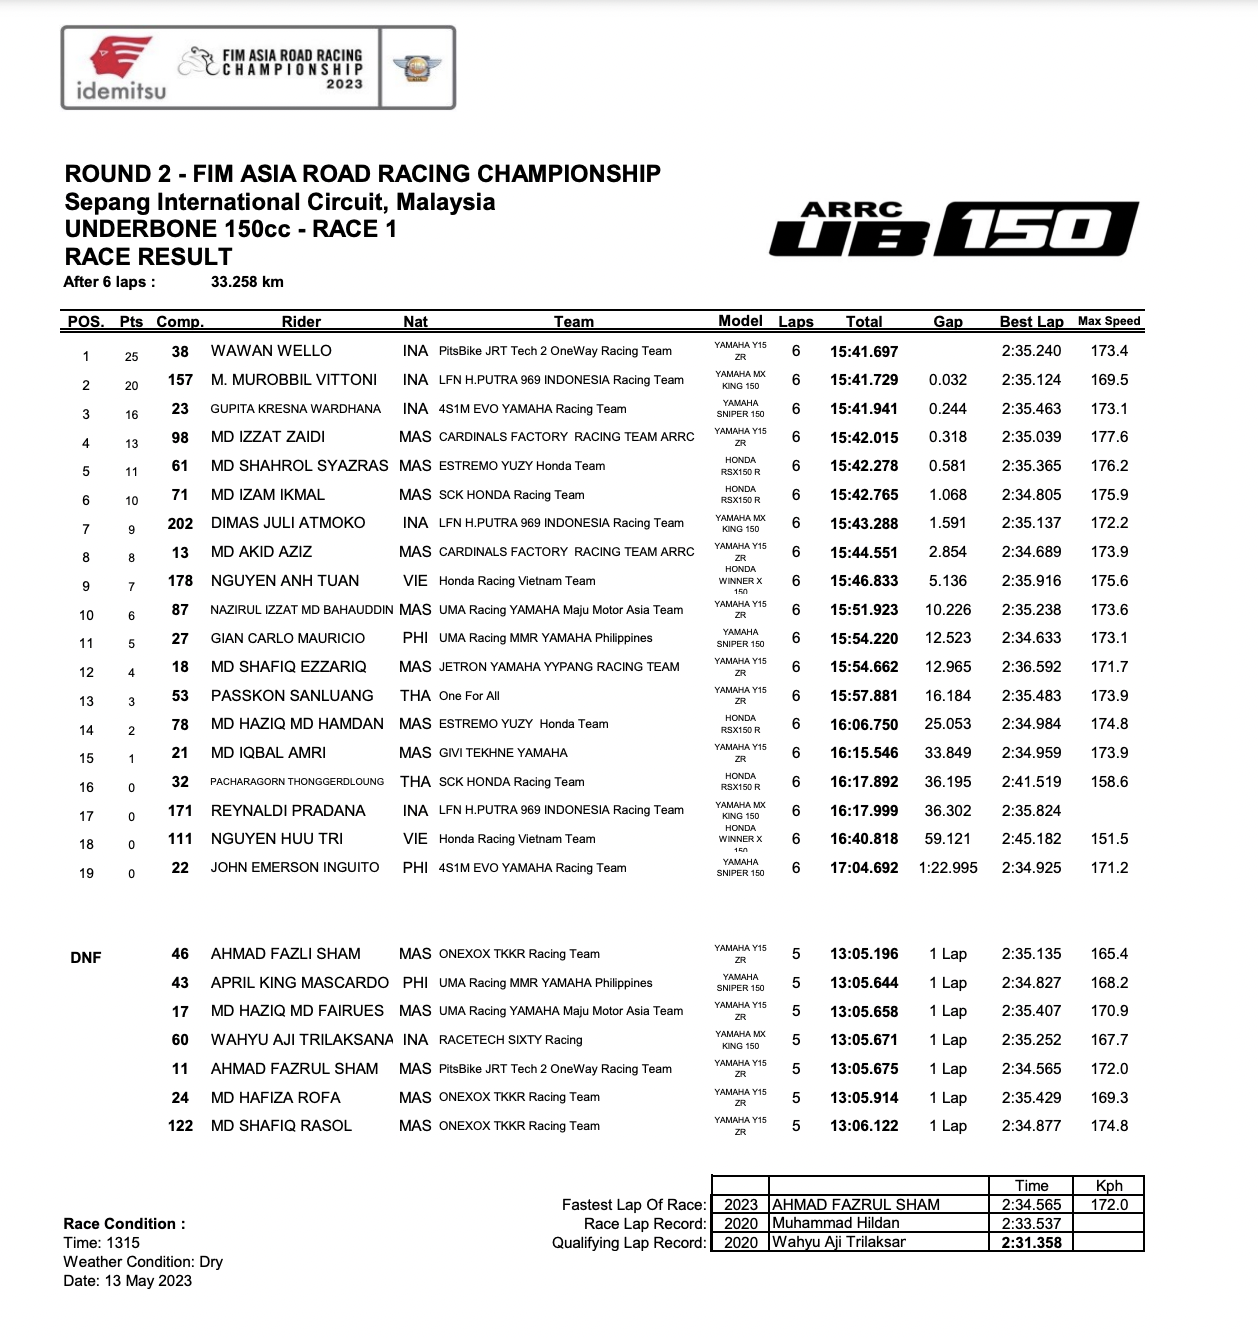 Race 1 Results Stage 2 ARRC 2023: Nguyễn Anh Tuấn surprised with a top 10 finish - arrc-2023-race-1-01.png